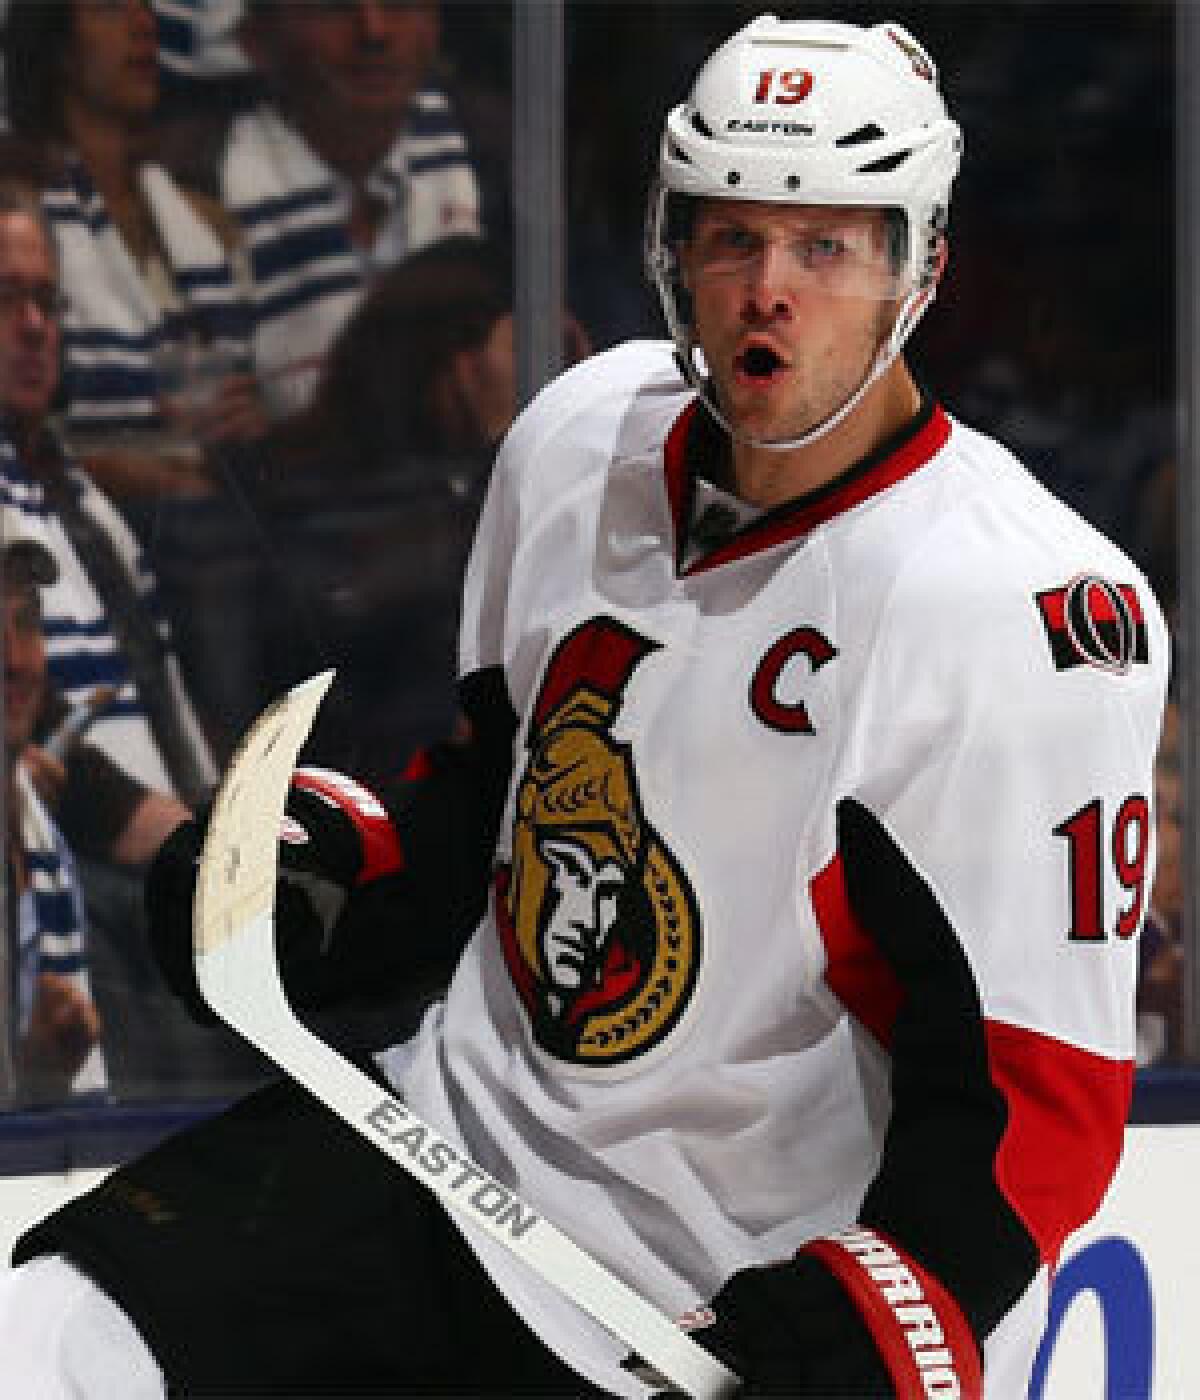 Ottawa captain Jason Spezza will miss Wednesday's game against the Kings due to a sore groin.